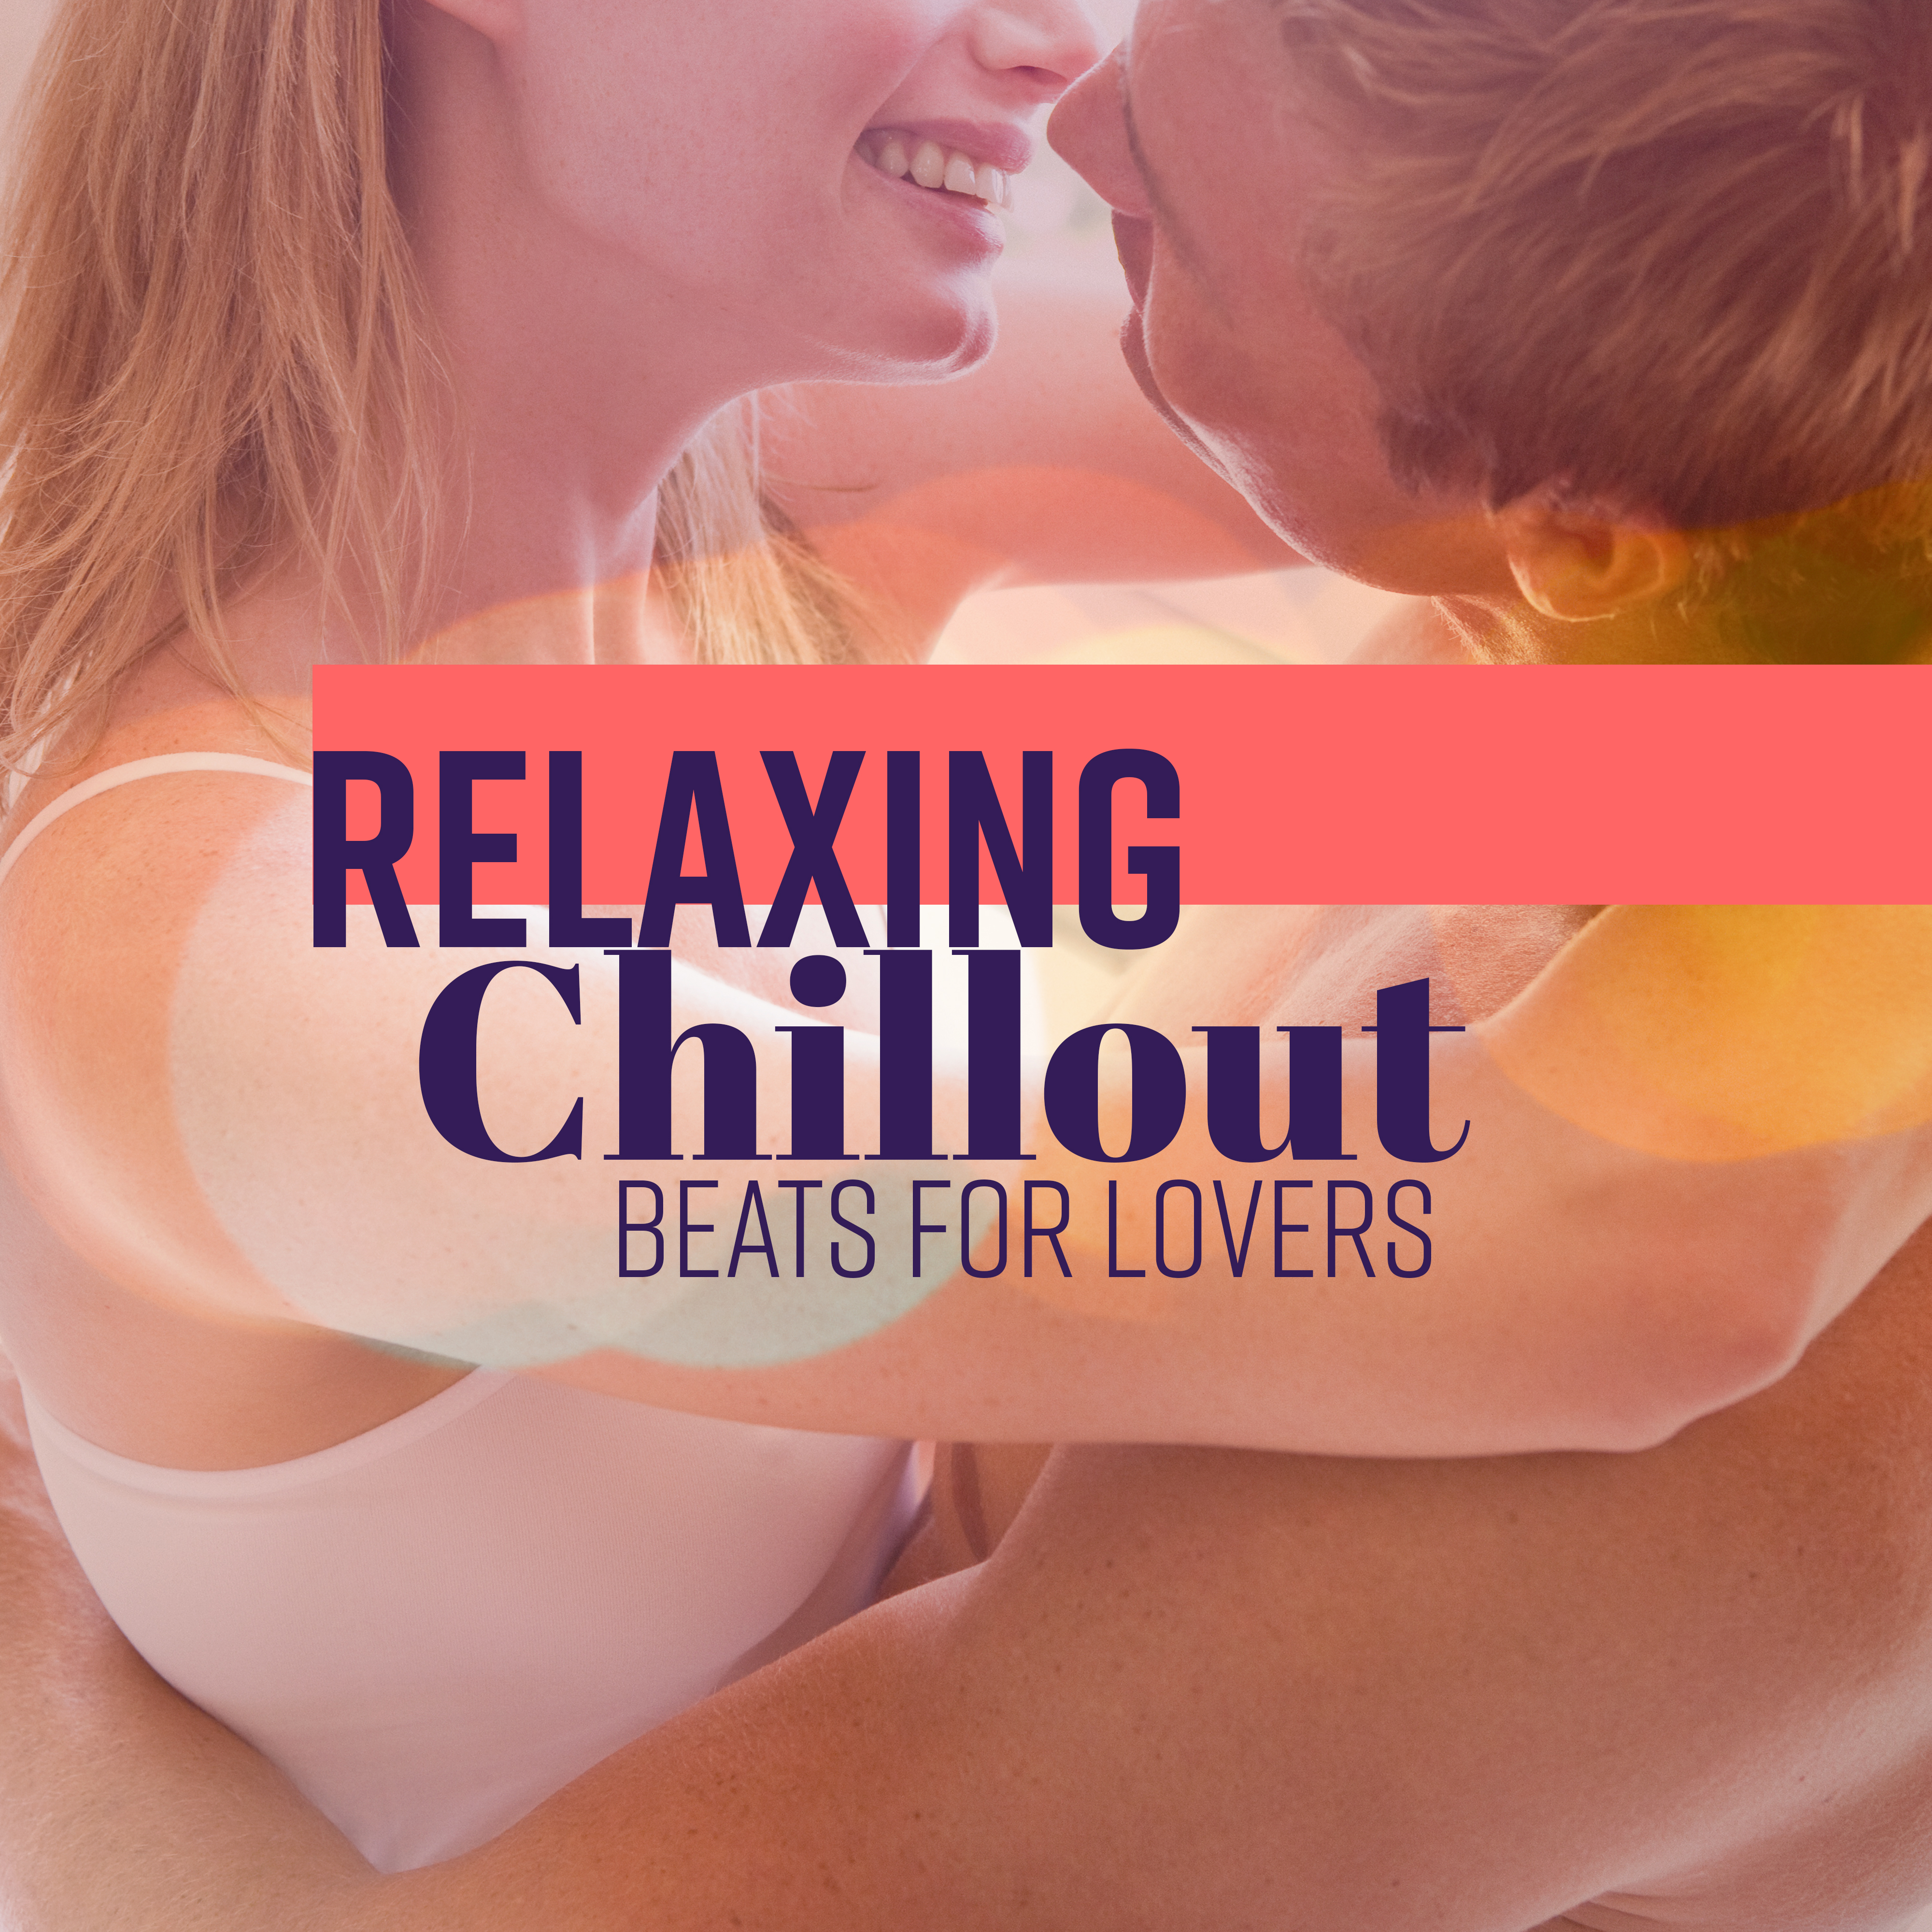 Relaxing Chillout Beats for Lovers